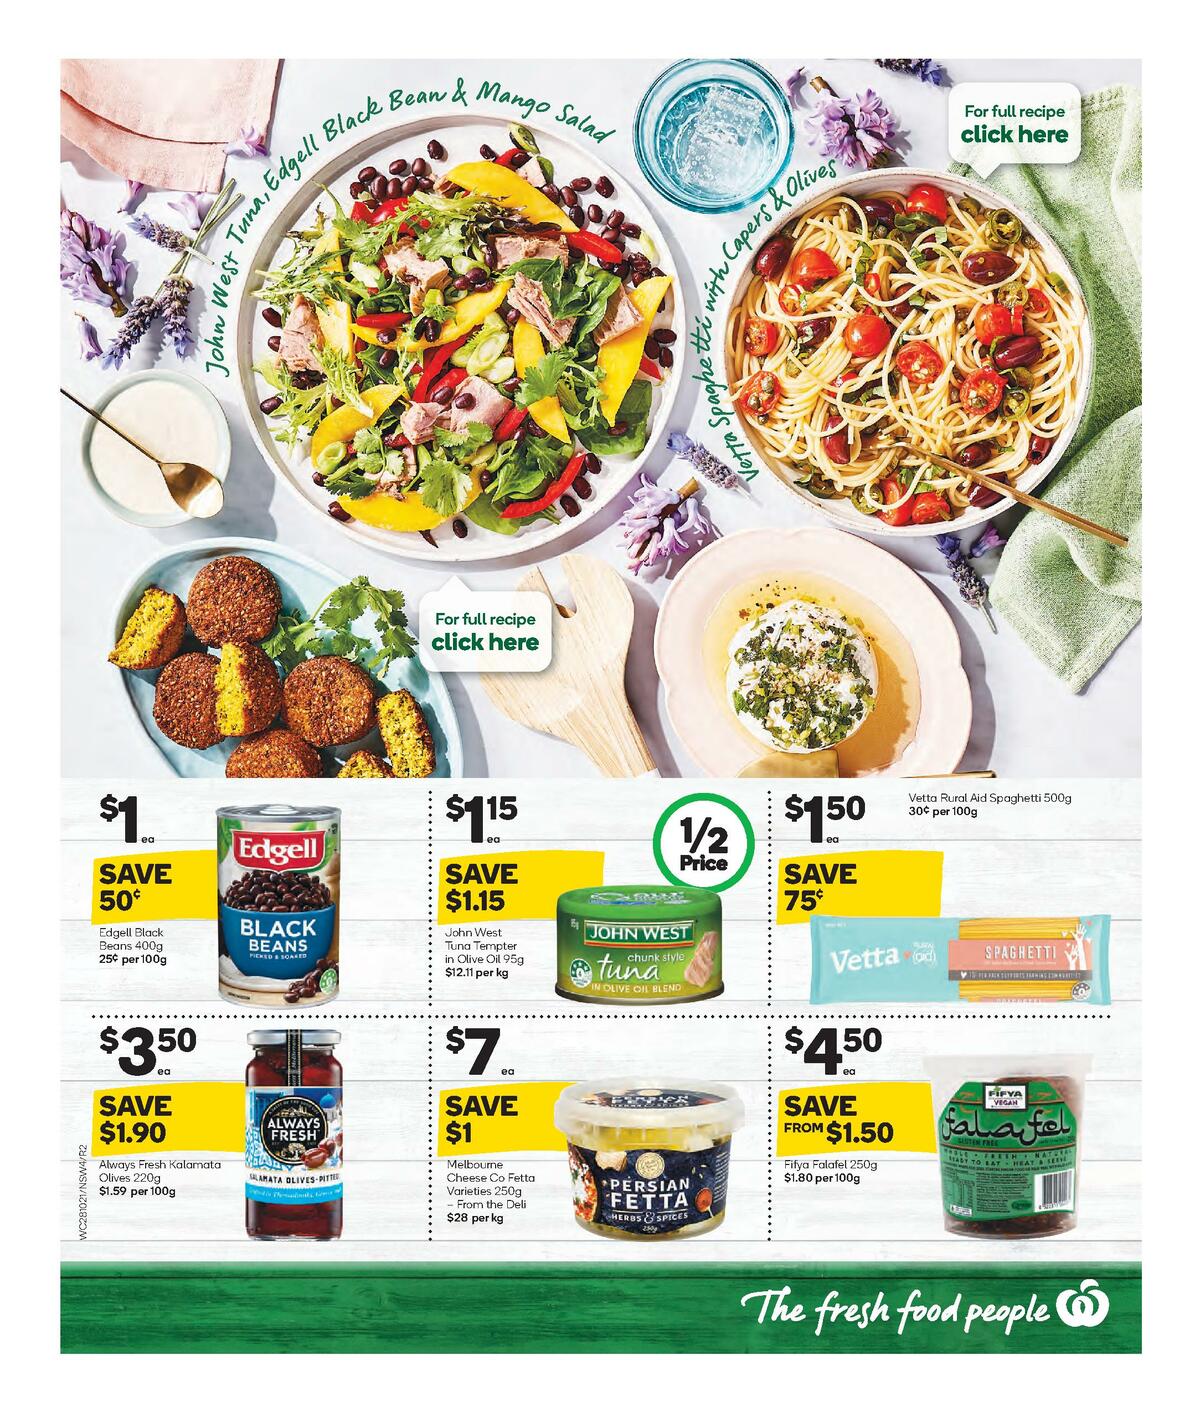 Woolworths Spring Entertaining Catalogues from 28 October